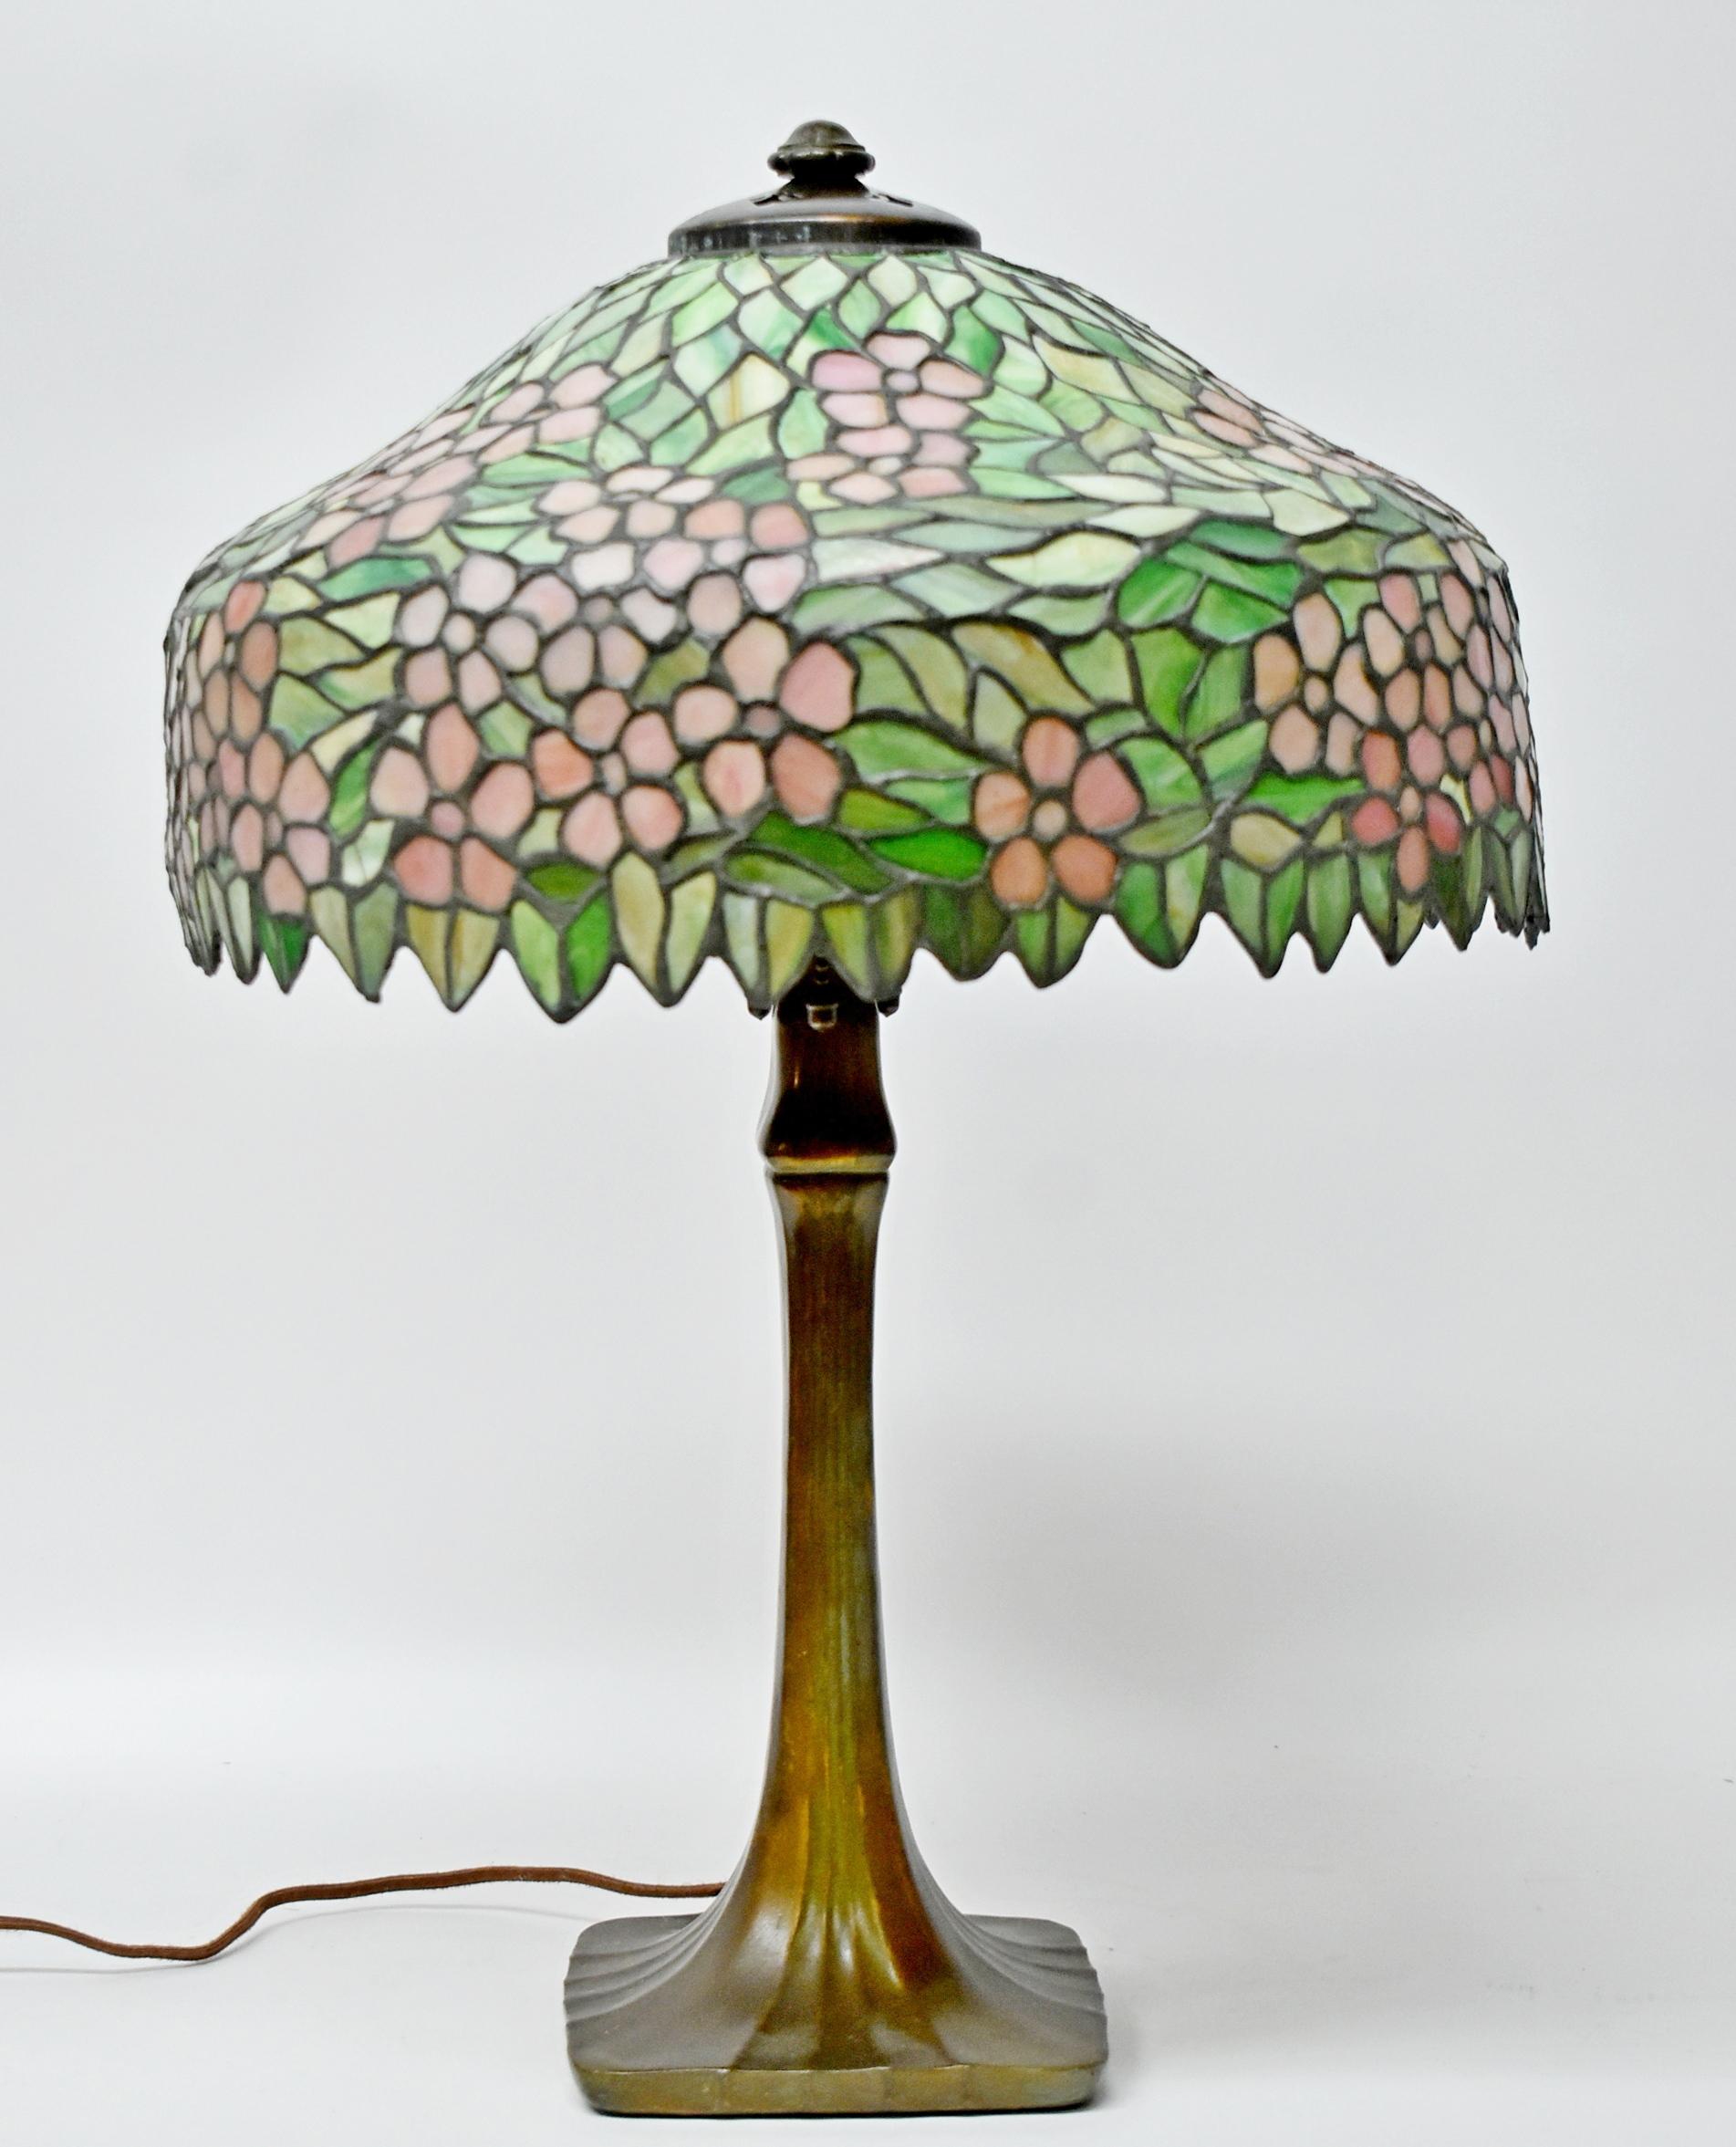 Handel Antique leaded stained glass table lamp, 1920s. Shaped bell form shade enclosing pink cherry blossom design on amidst a variegated green ground and hanging leaf edge border. Shade is signed. Bronze base with three sockets with acorn pulls and